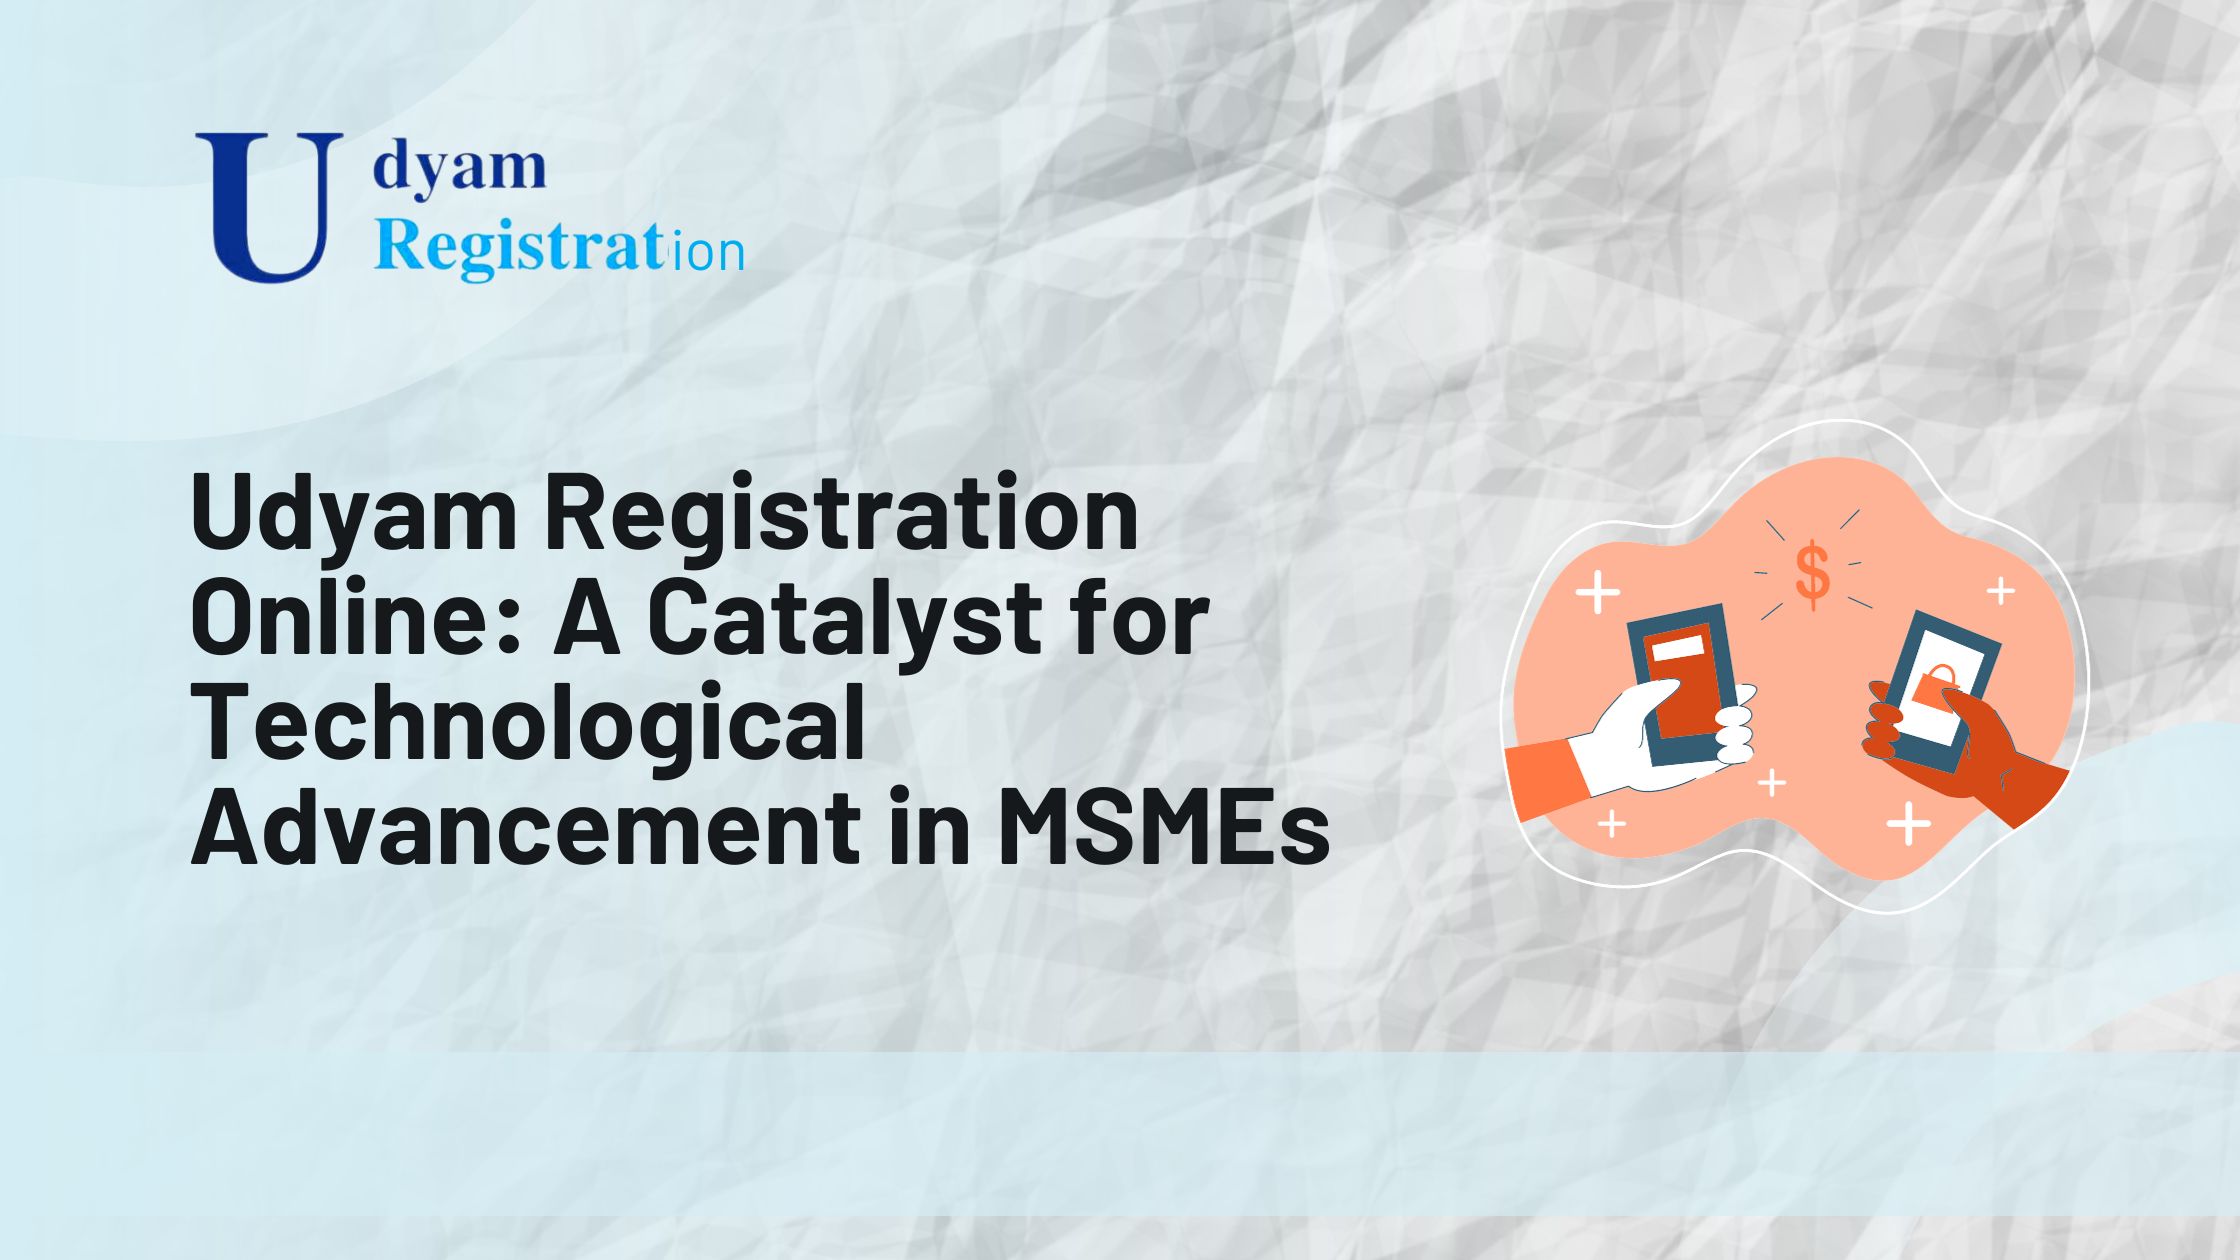 Udyam Registration Online: A Catalyst for Technological Advancement in MSMEs